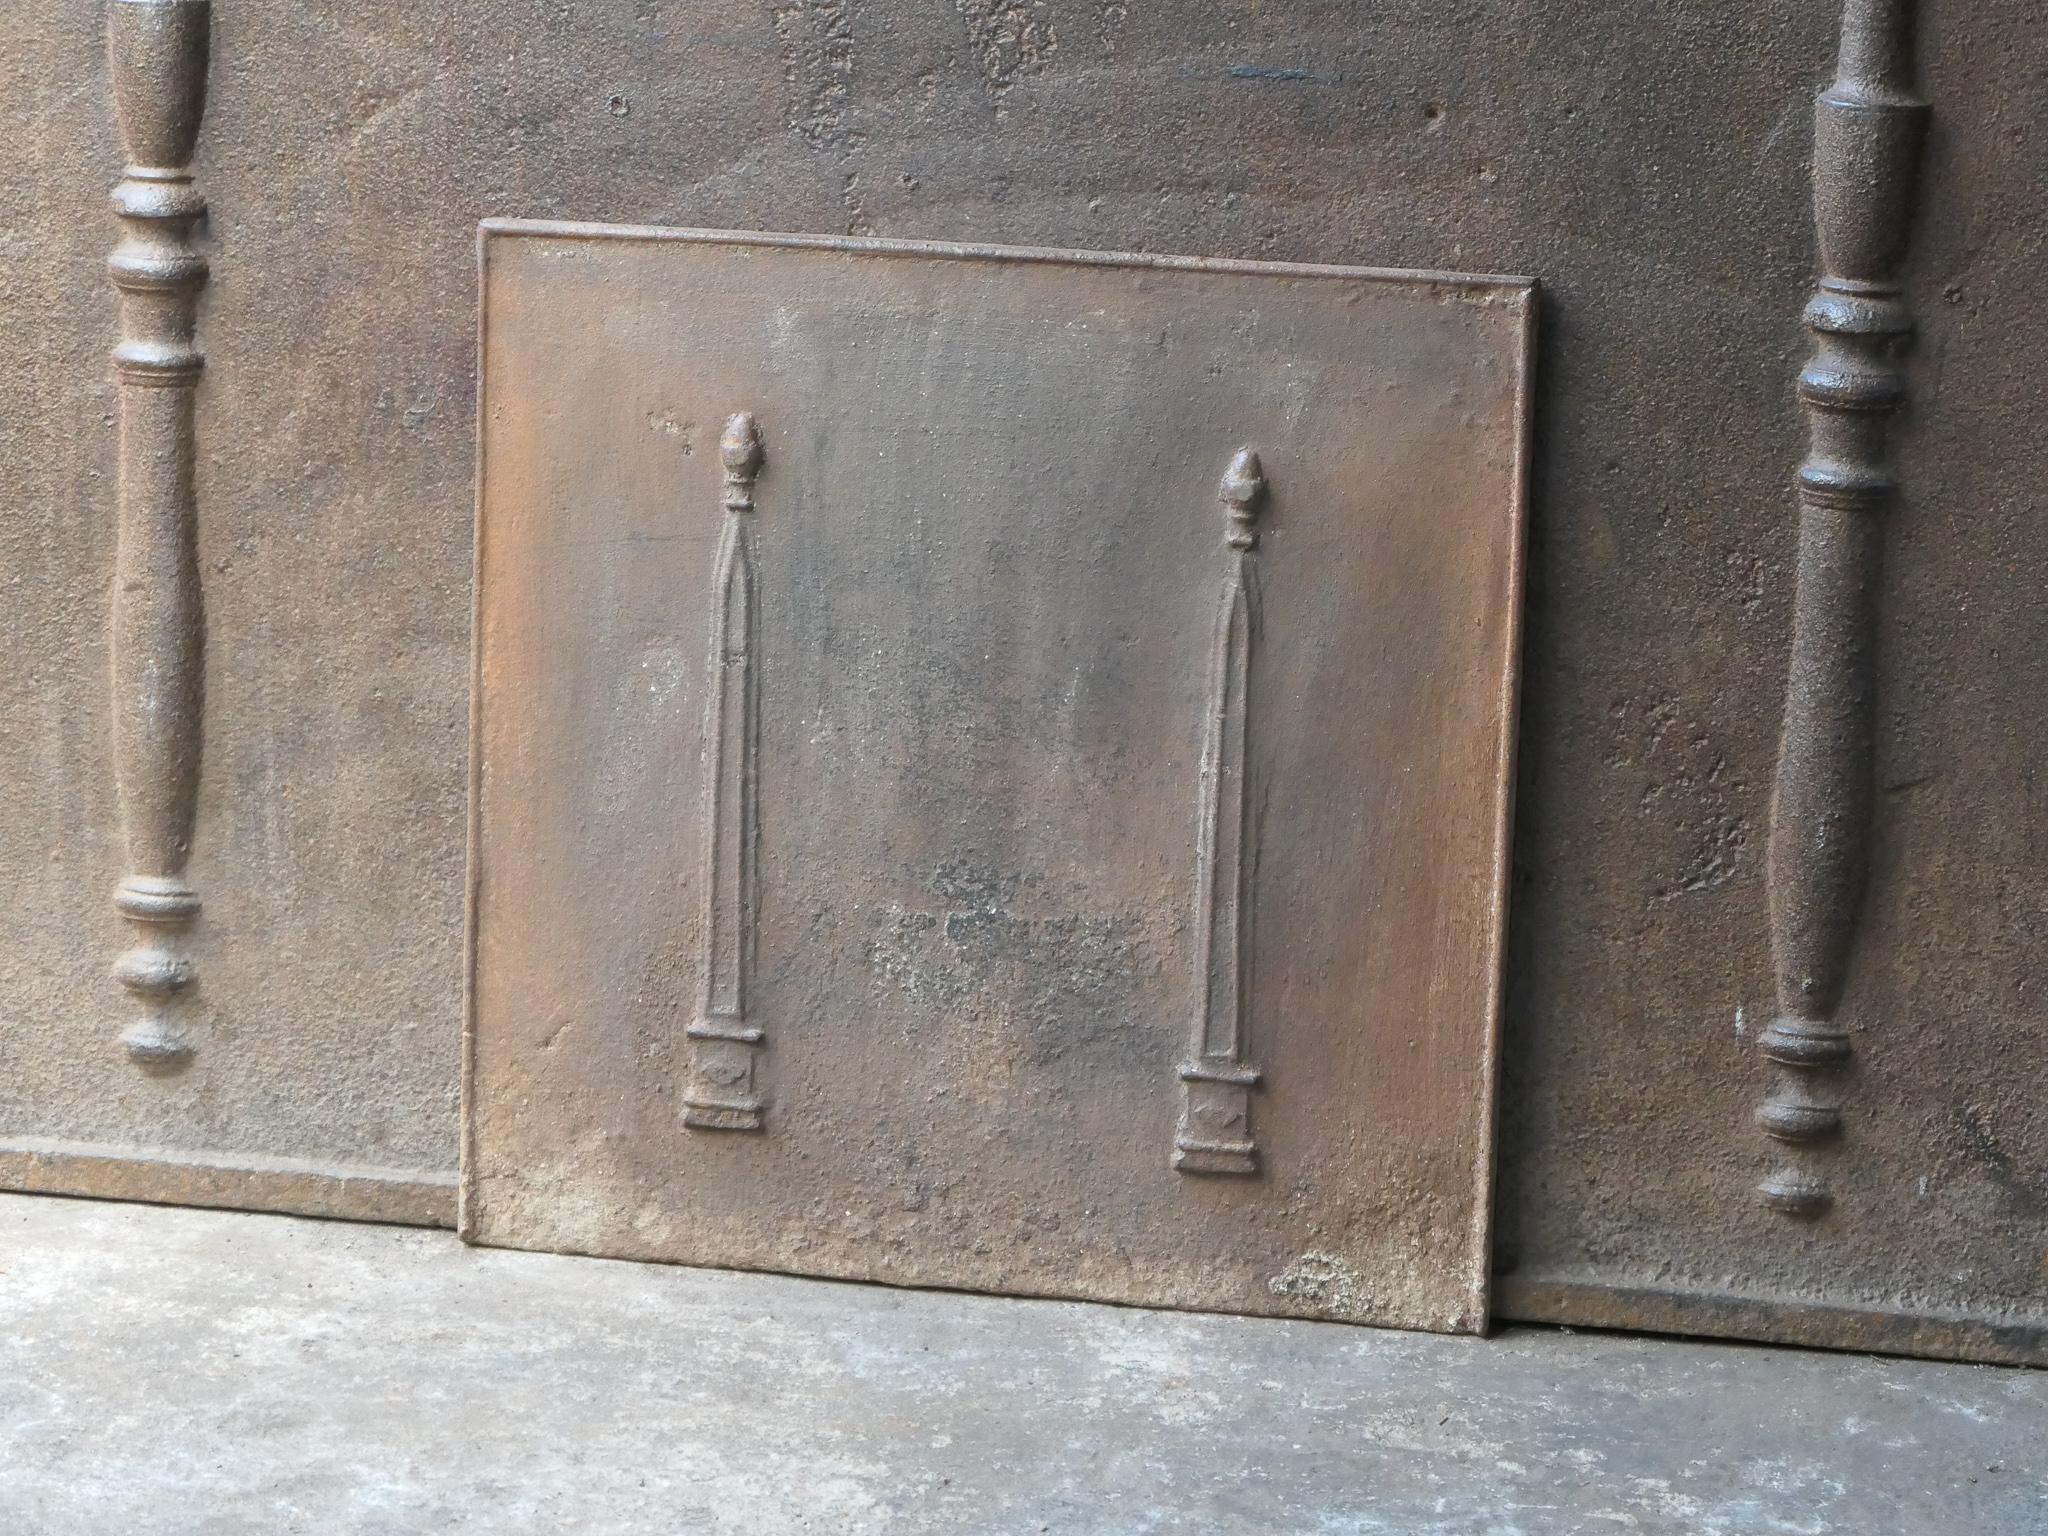 19th century French neoclassical fireback with two pillars of freedom. The pillars symbolize the value liberty, one of the three values of the French revolution. 

The fireback is made of cast iron and has a natural brown patina. Upon request it can